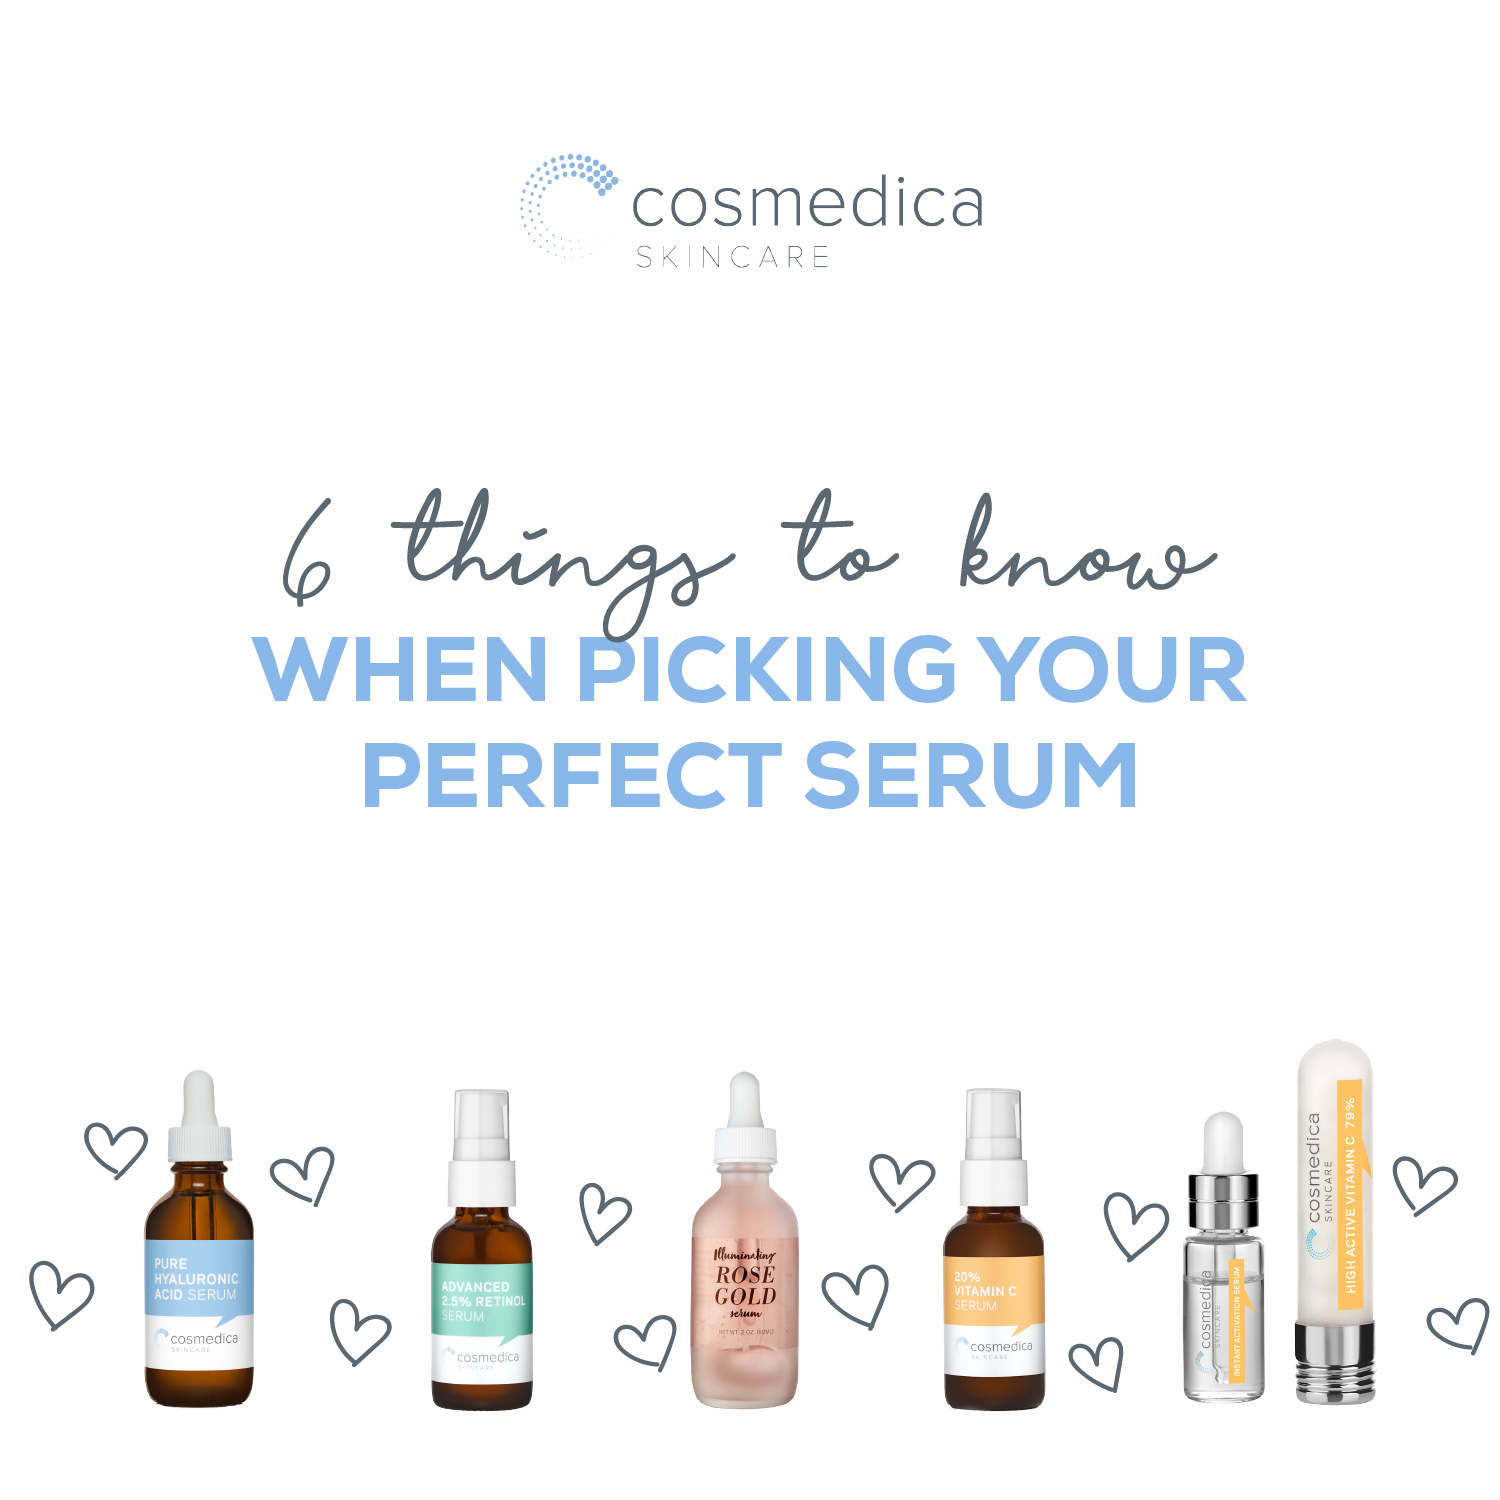 6 Things to Know When Picking Your Perfect Serum